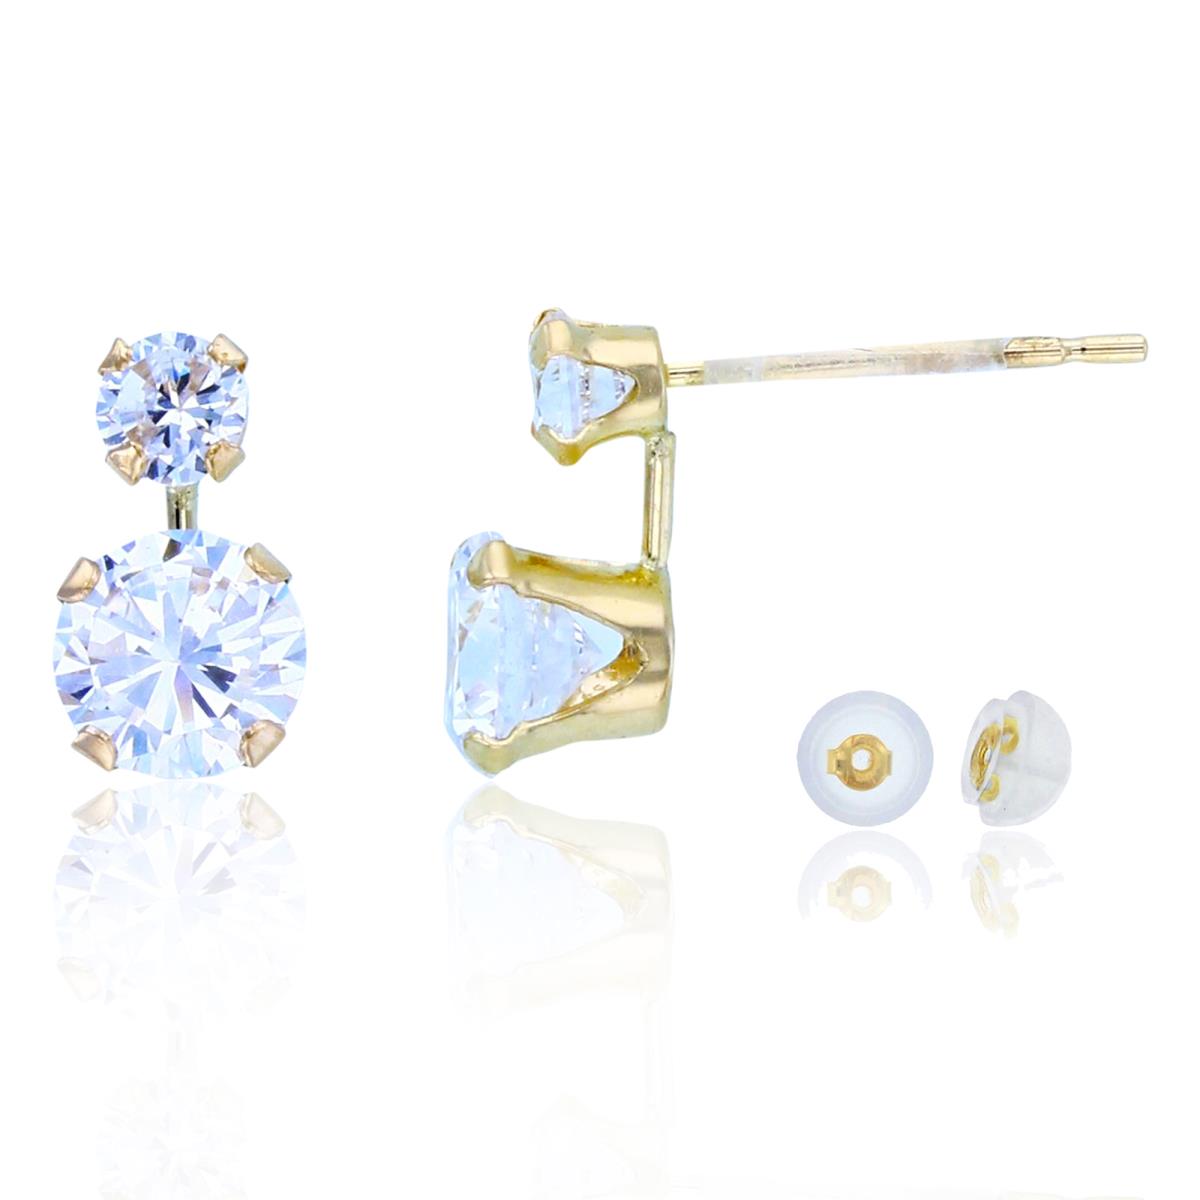 10K Yellow Gold 3mm & 5mm Rnd CZ  Top/Bottom Studs with Silicon Backs